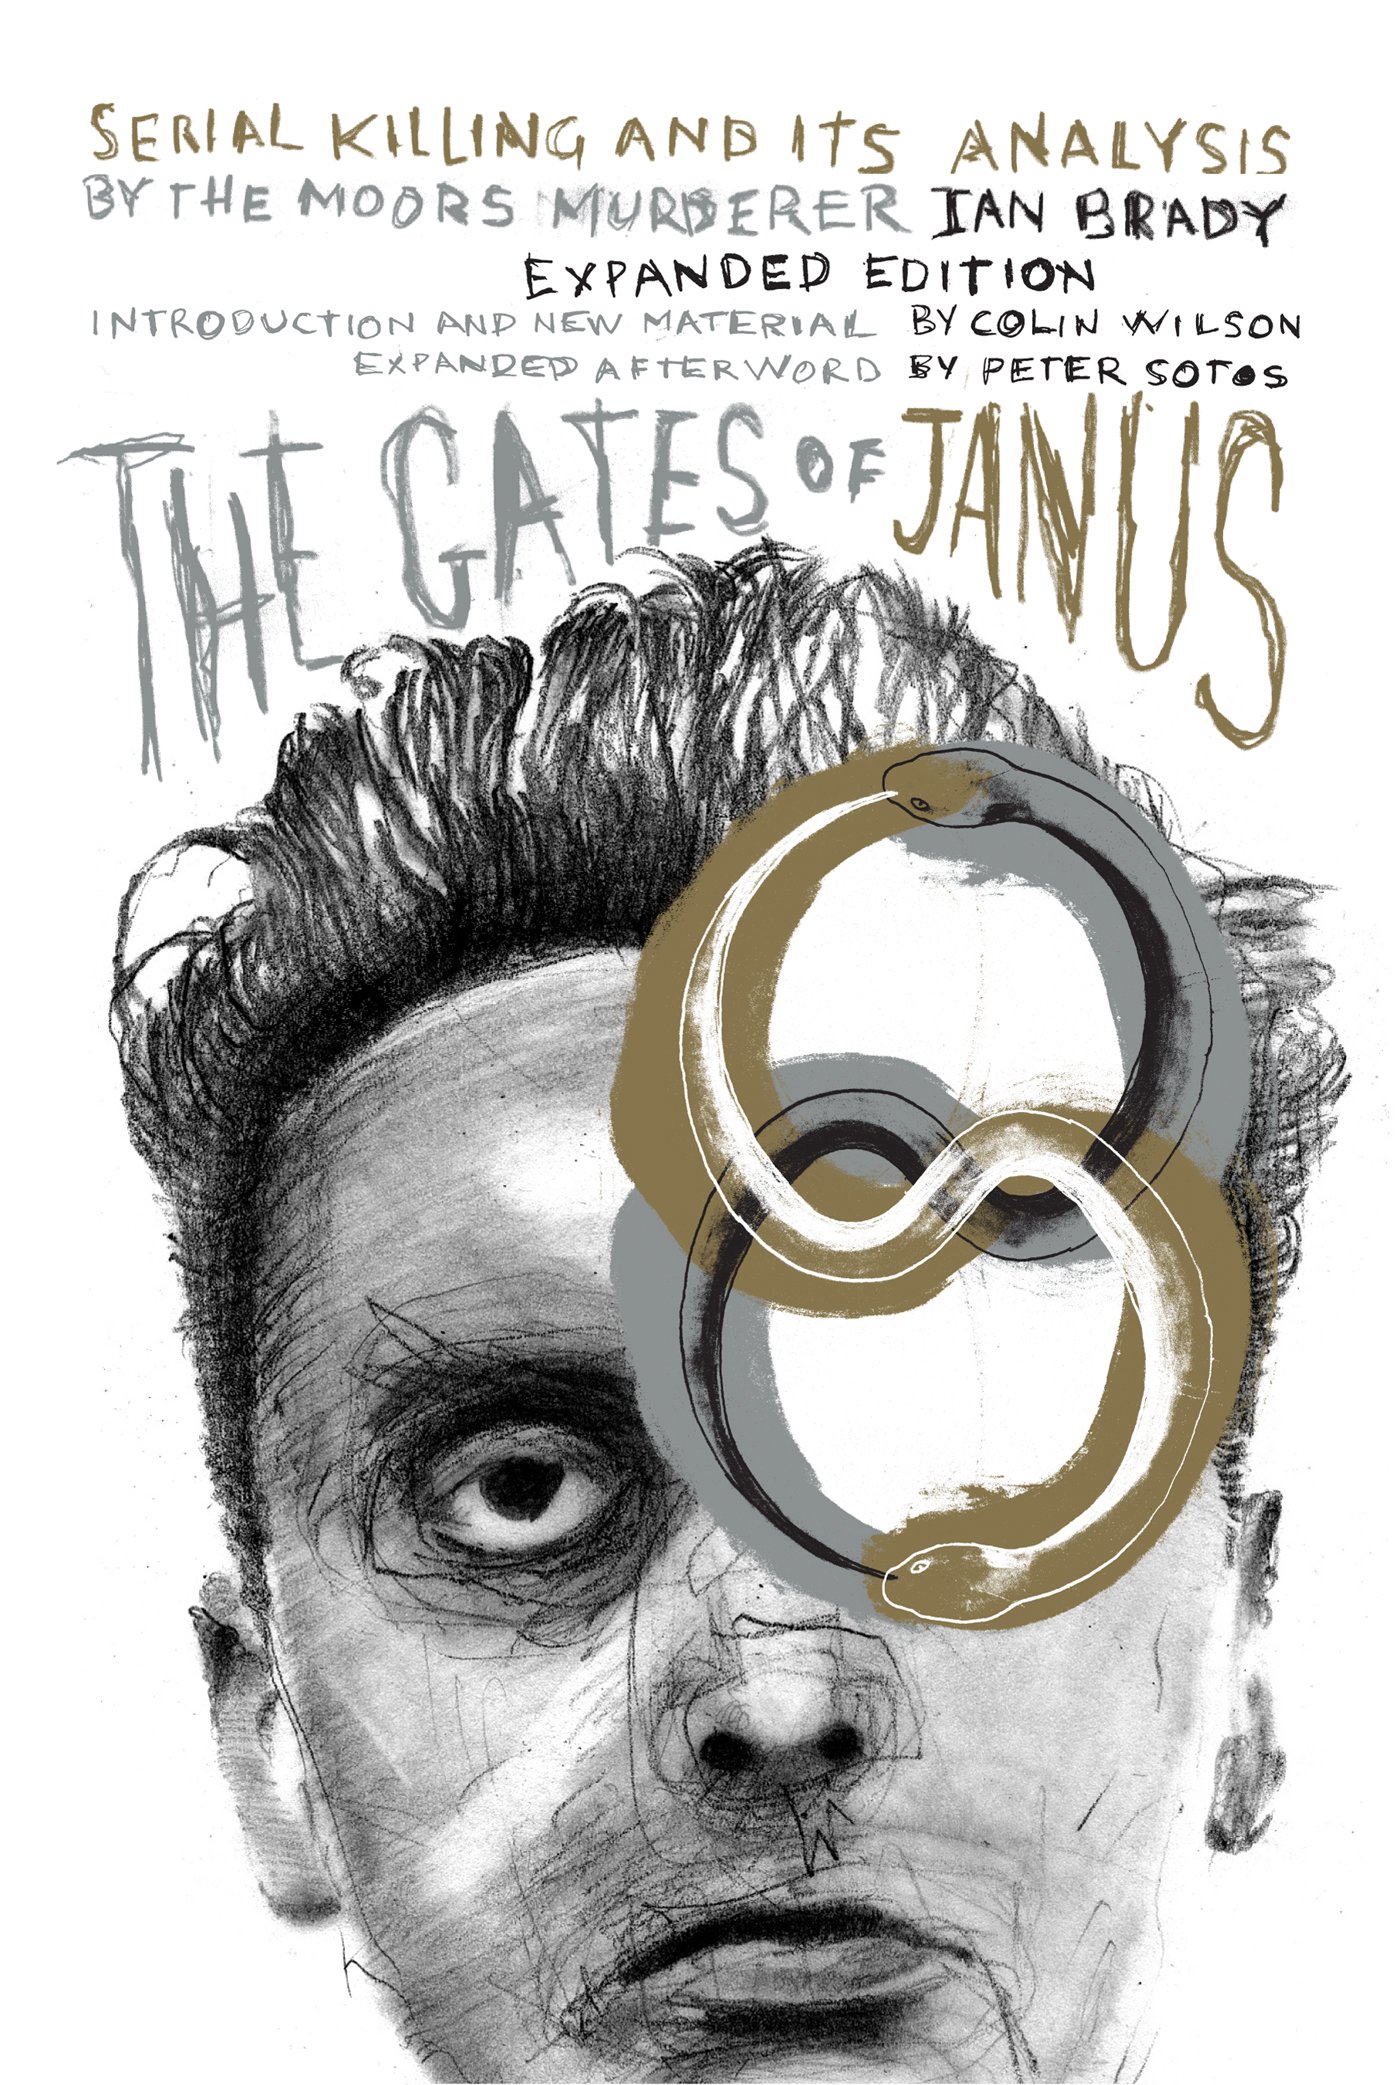 The Gates of Janus: Serial Killing and Its Analysis by the Moors Murderer Ian Brady